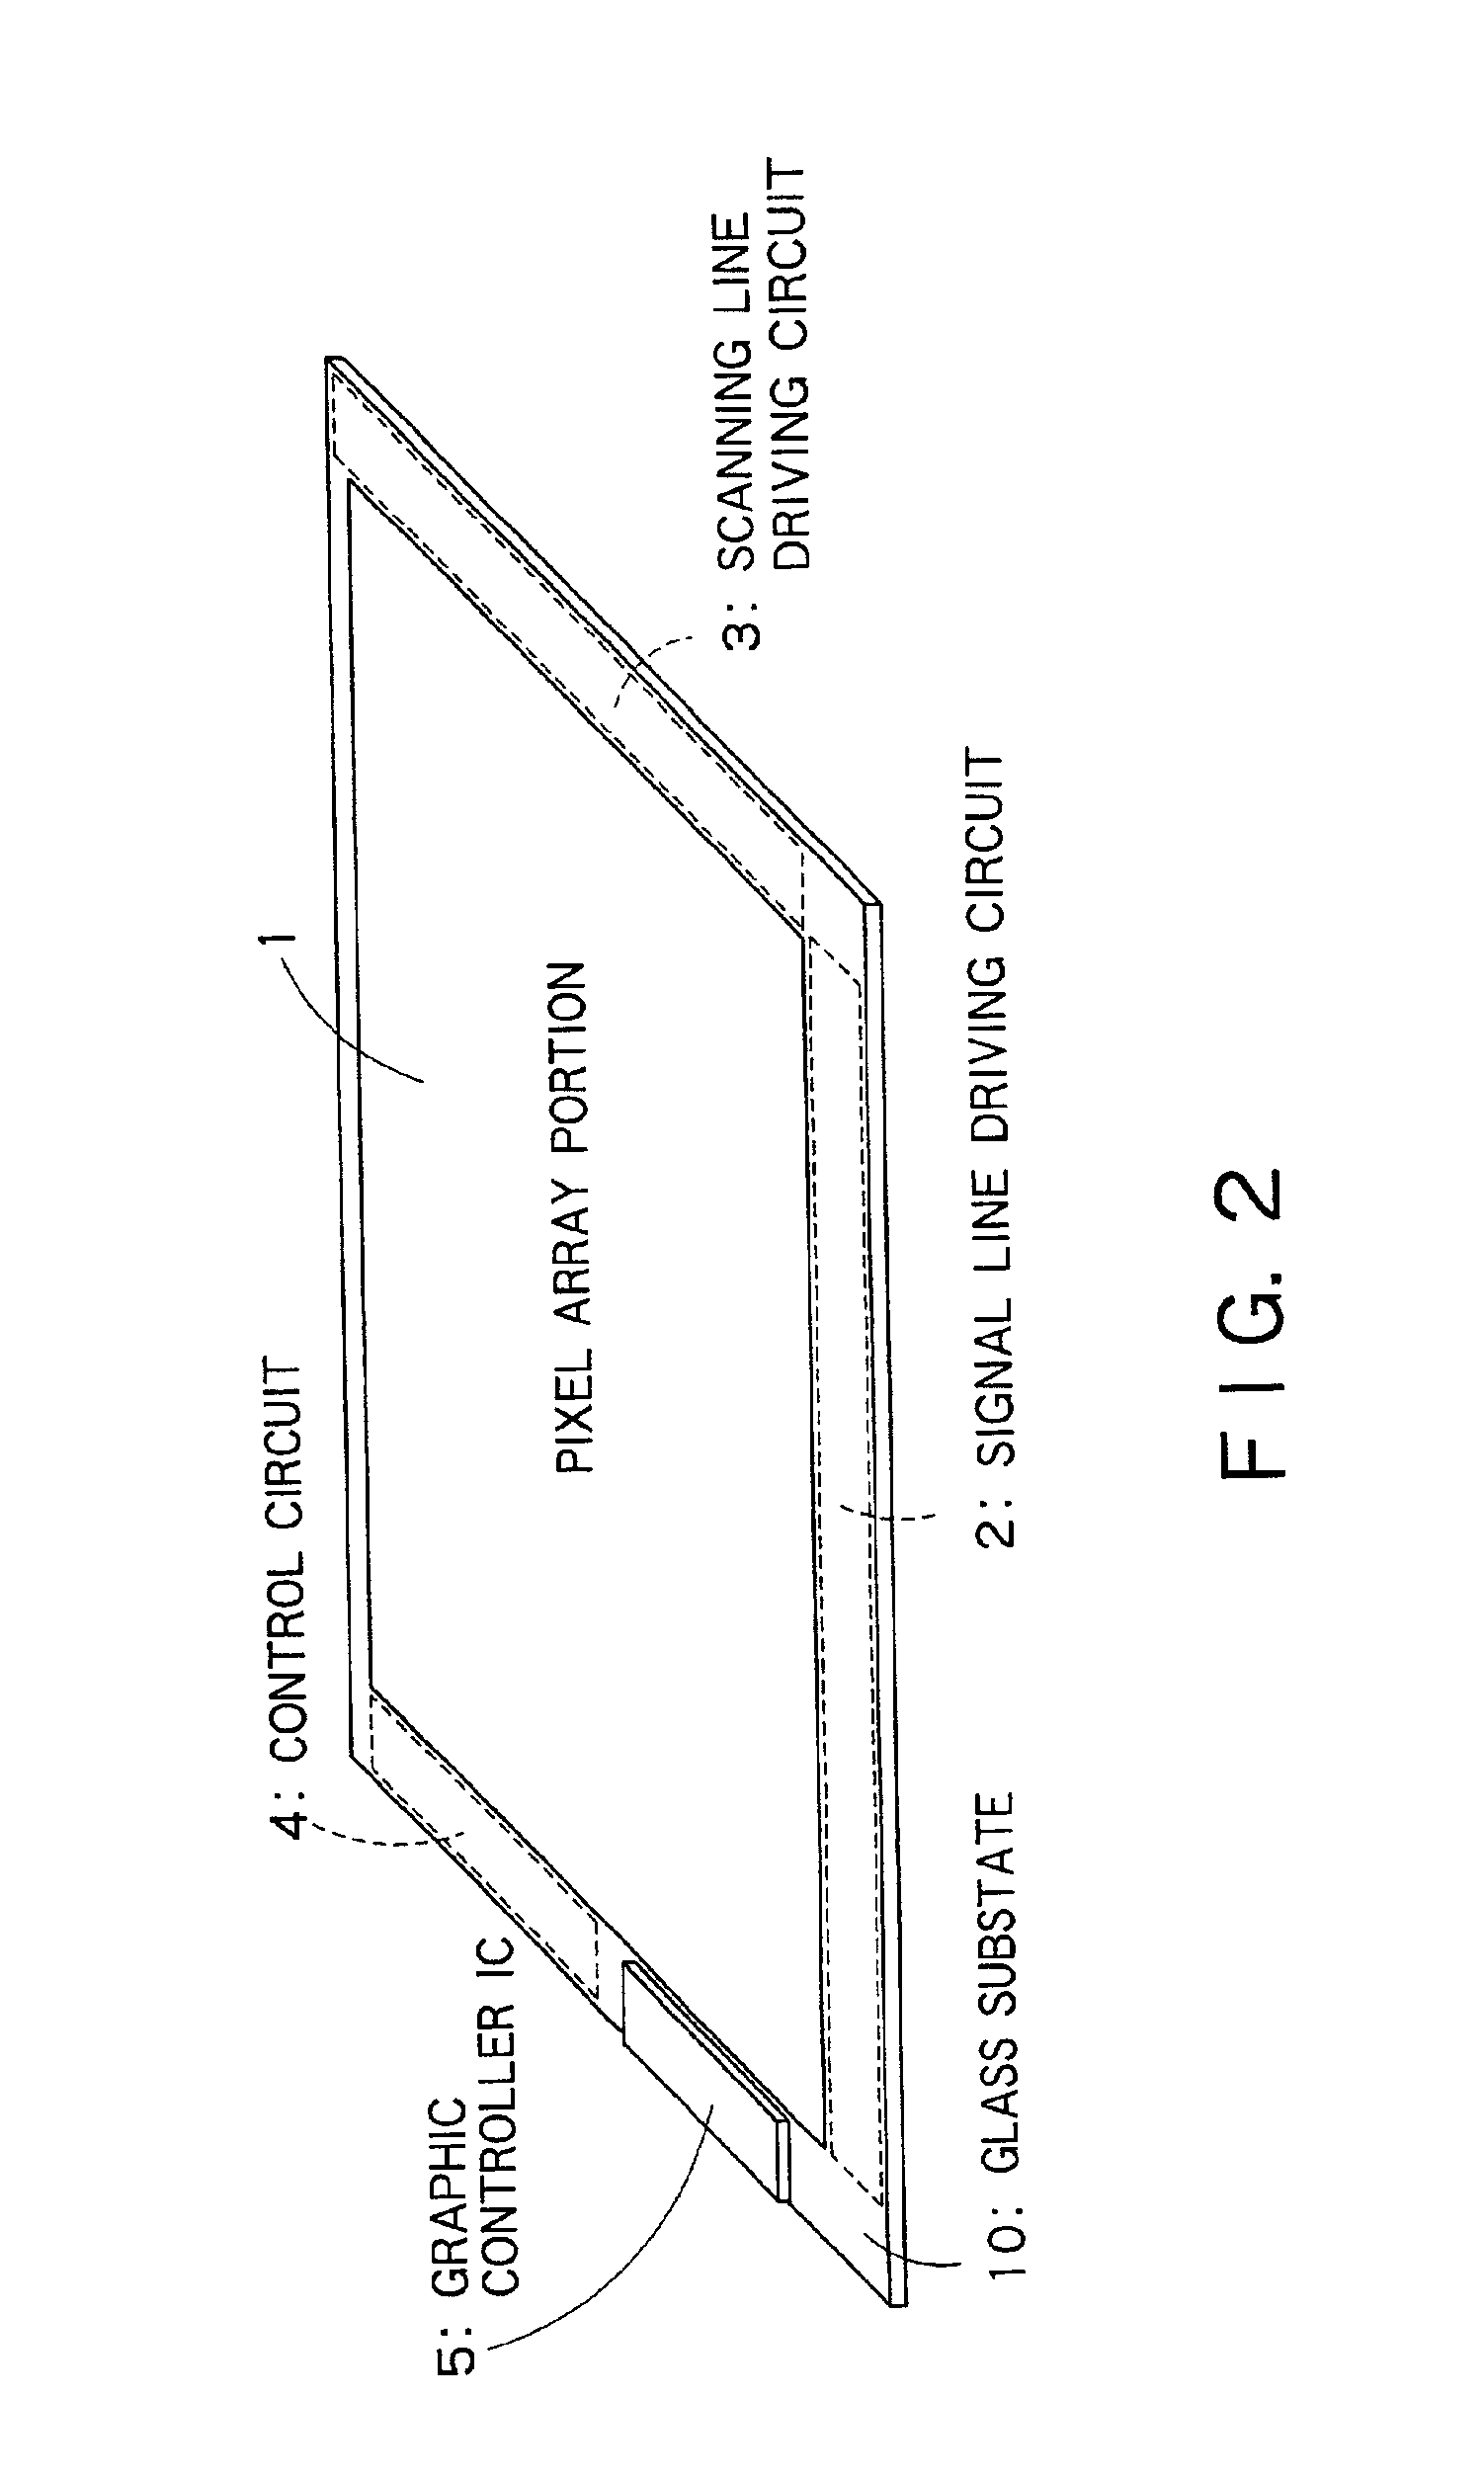 Display apparatus, image control semiconductor device, and method for driving display apparatus